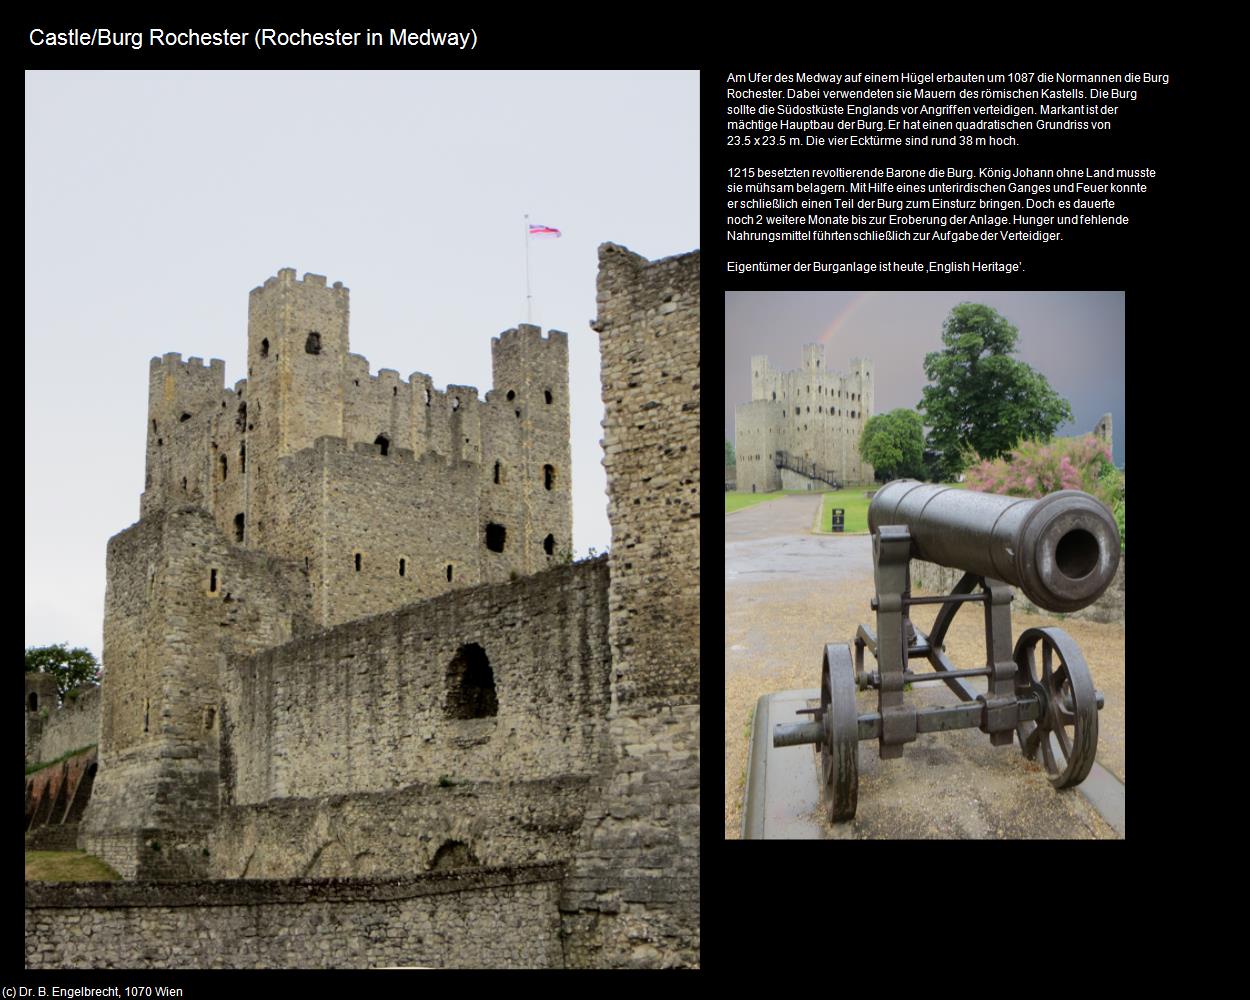 Castle/Burg Rochester (Rochester in Medway, England) in Kulturatlas-ENGLAND und WALES